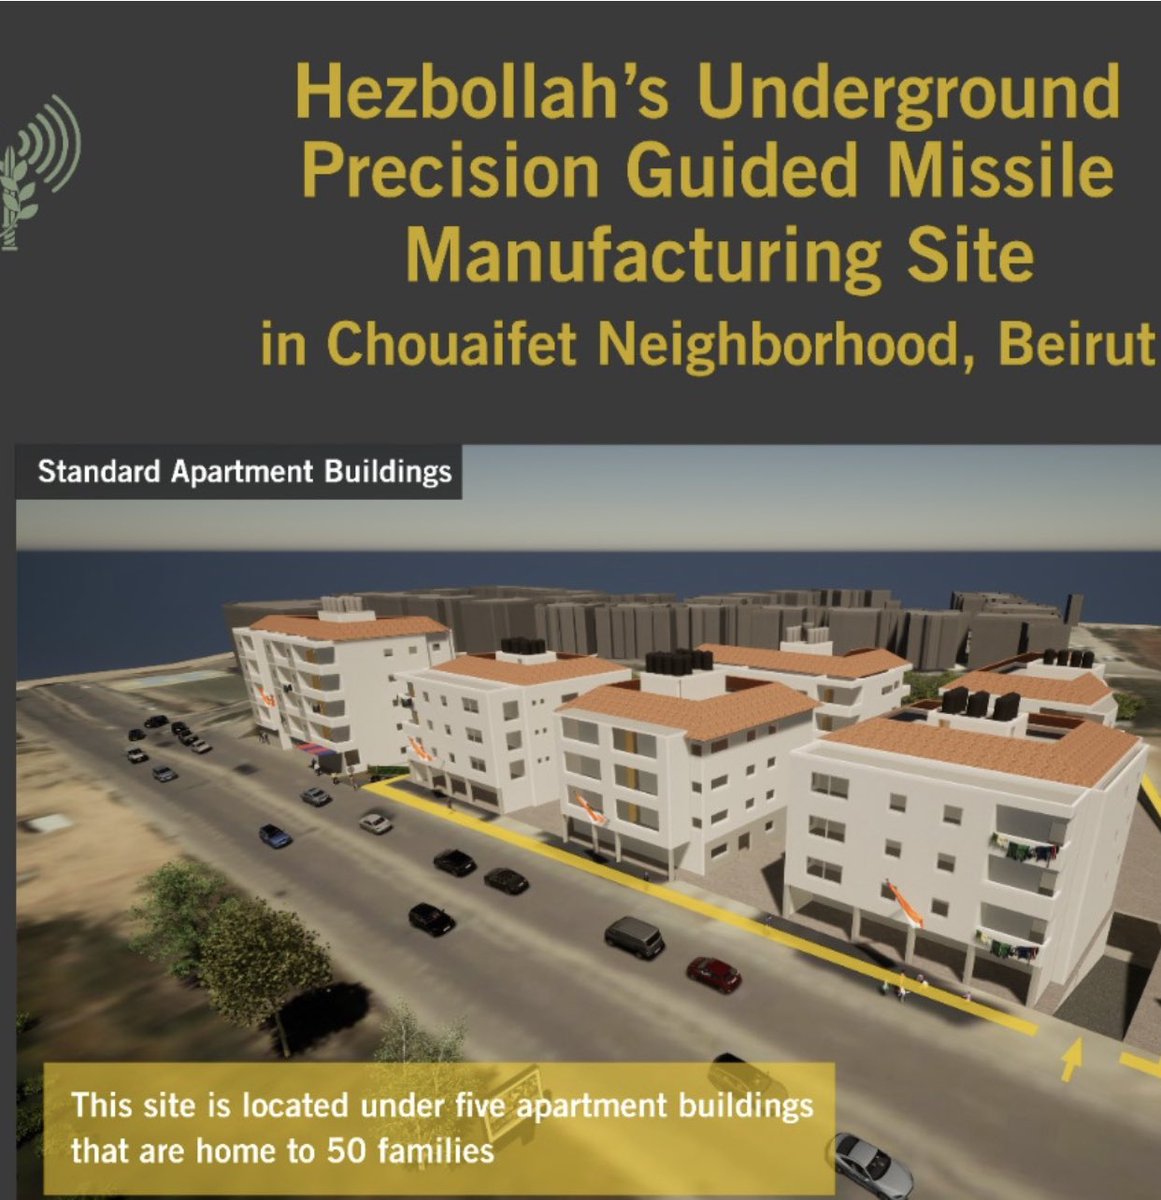 This missile manufacturing site is located under five apartment buildings home to 50 families. Hezbollah’s use of human shields makes them war criminals.